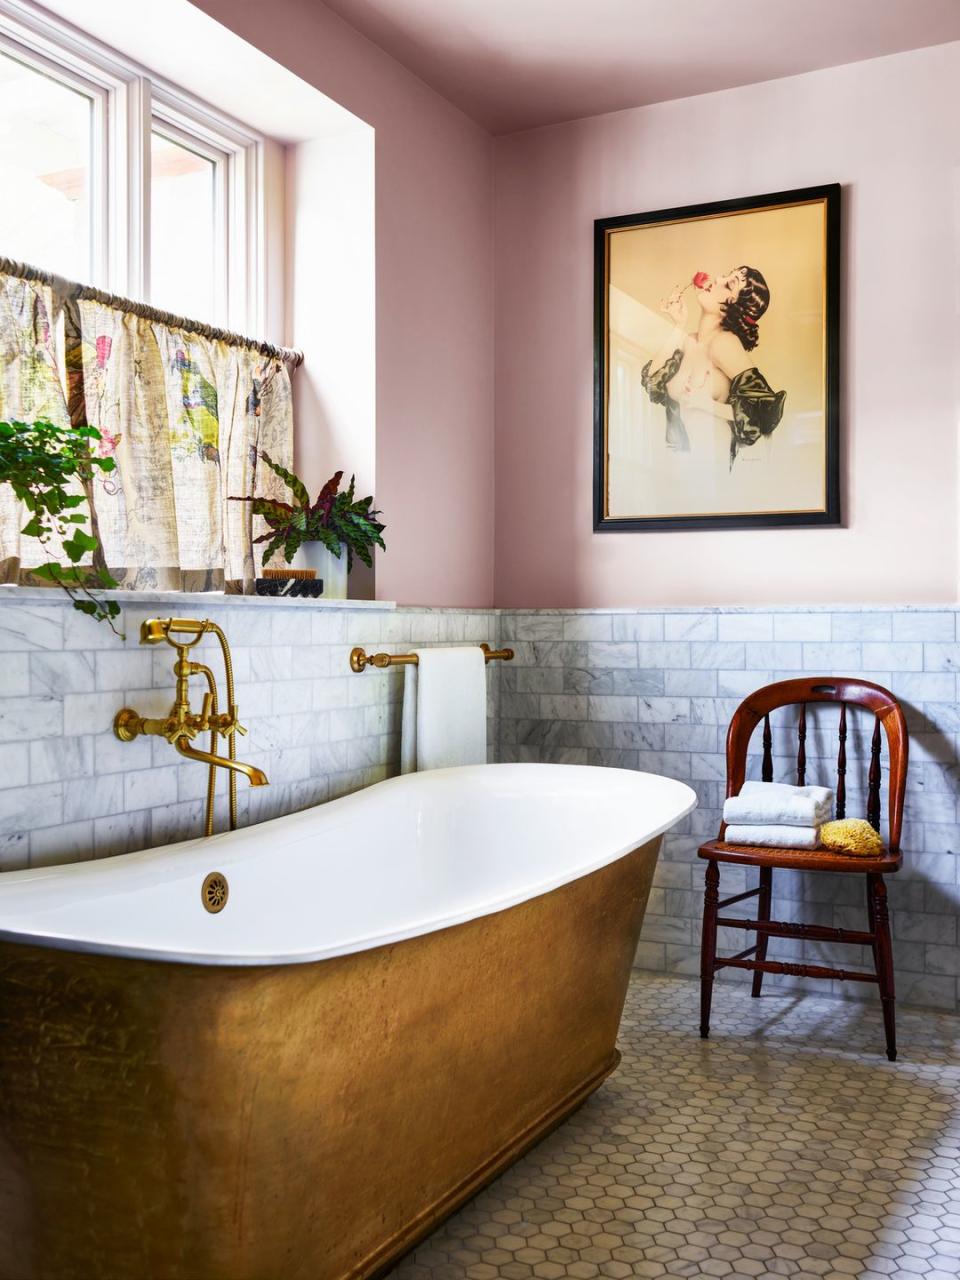 primary bathroom the clients requested ample marble tile, so casagrande pulled out all the stops tub penhaglion fixtures newport brass wall paint peignoir, farrow ball art print alberto vargas curtain fabric timorous beasties